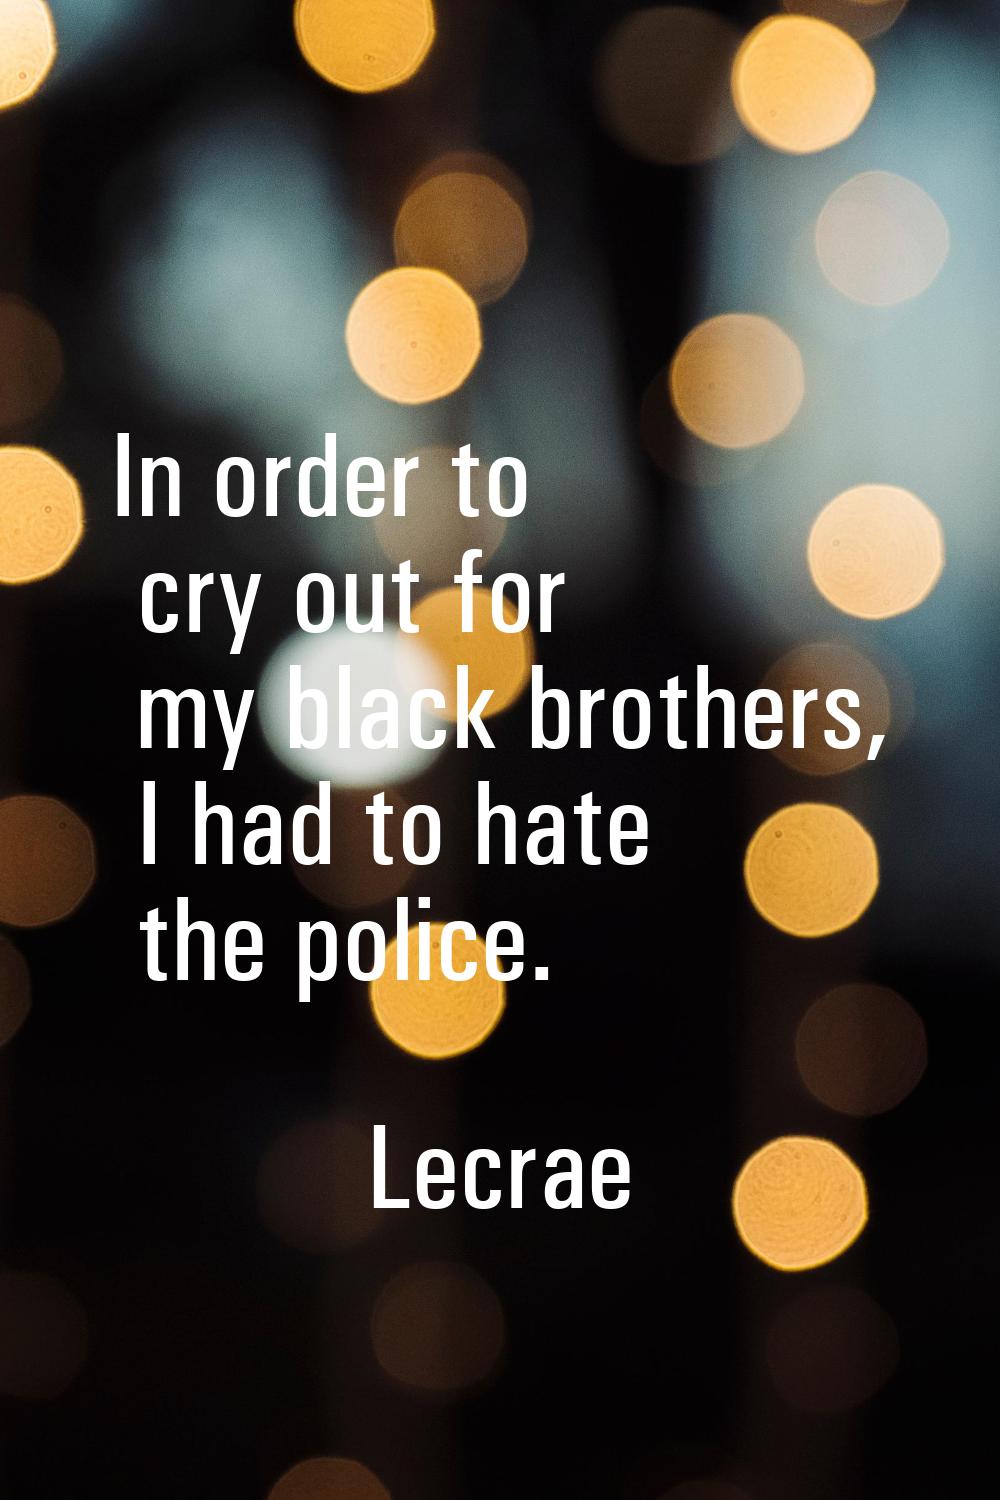 In order to cry out for my black brothers, I had to hate the police.